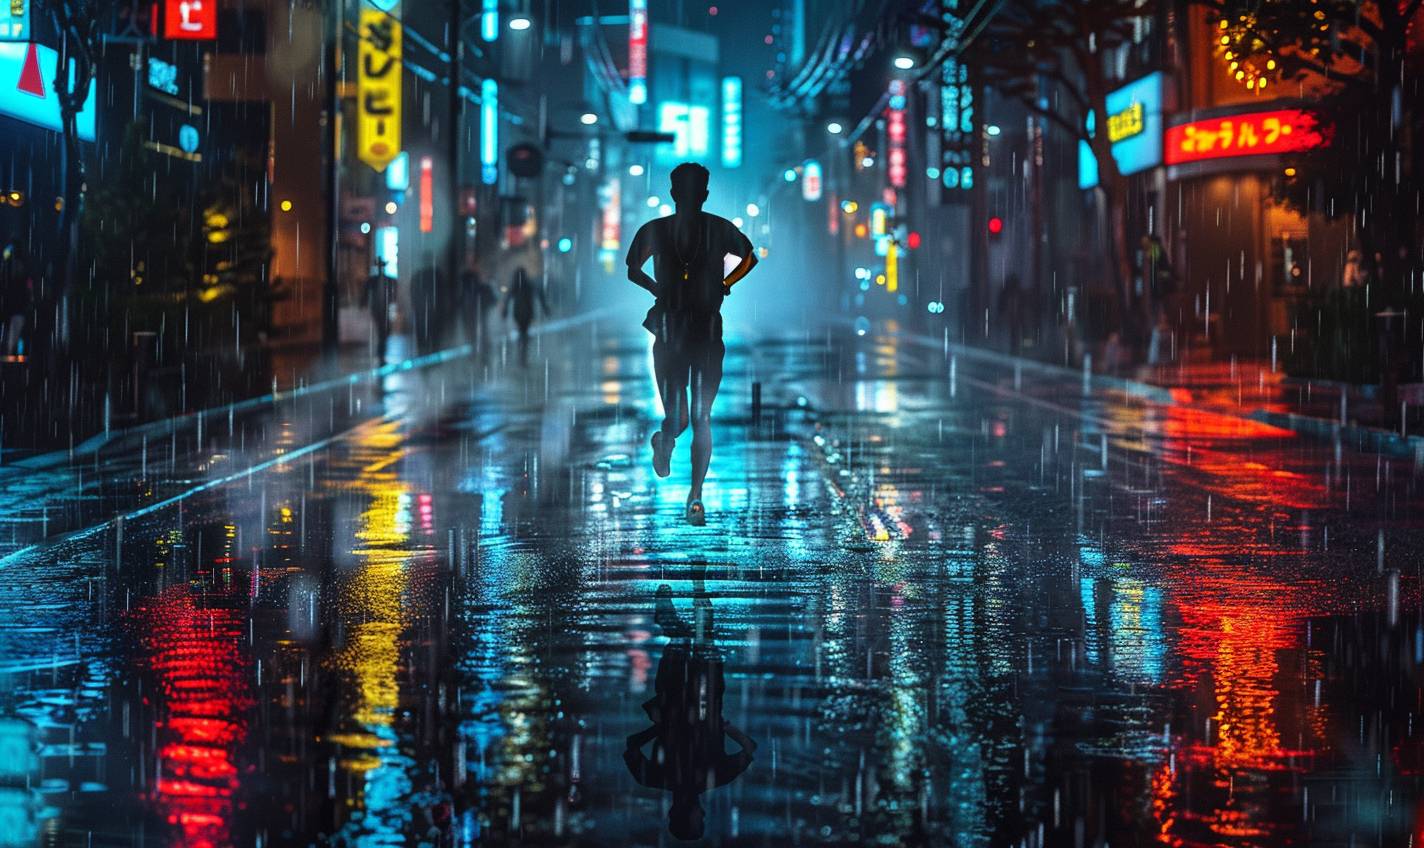 A man running through a rain-soaked city street at night, illuminated by neon lights reflecting off the wet pavement, with an intense expression of determination.